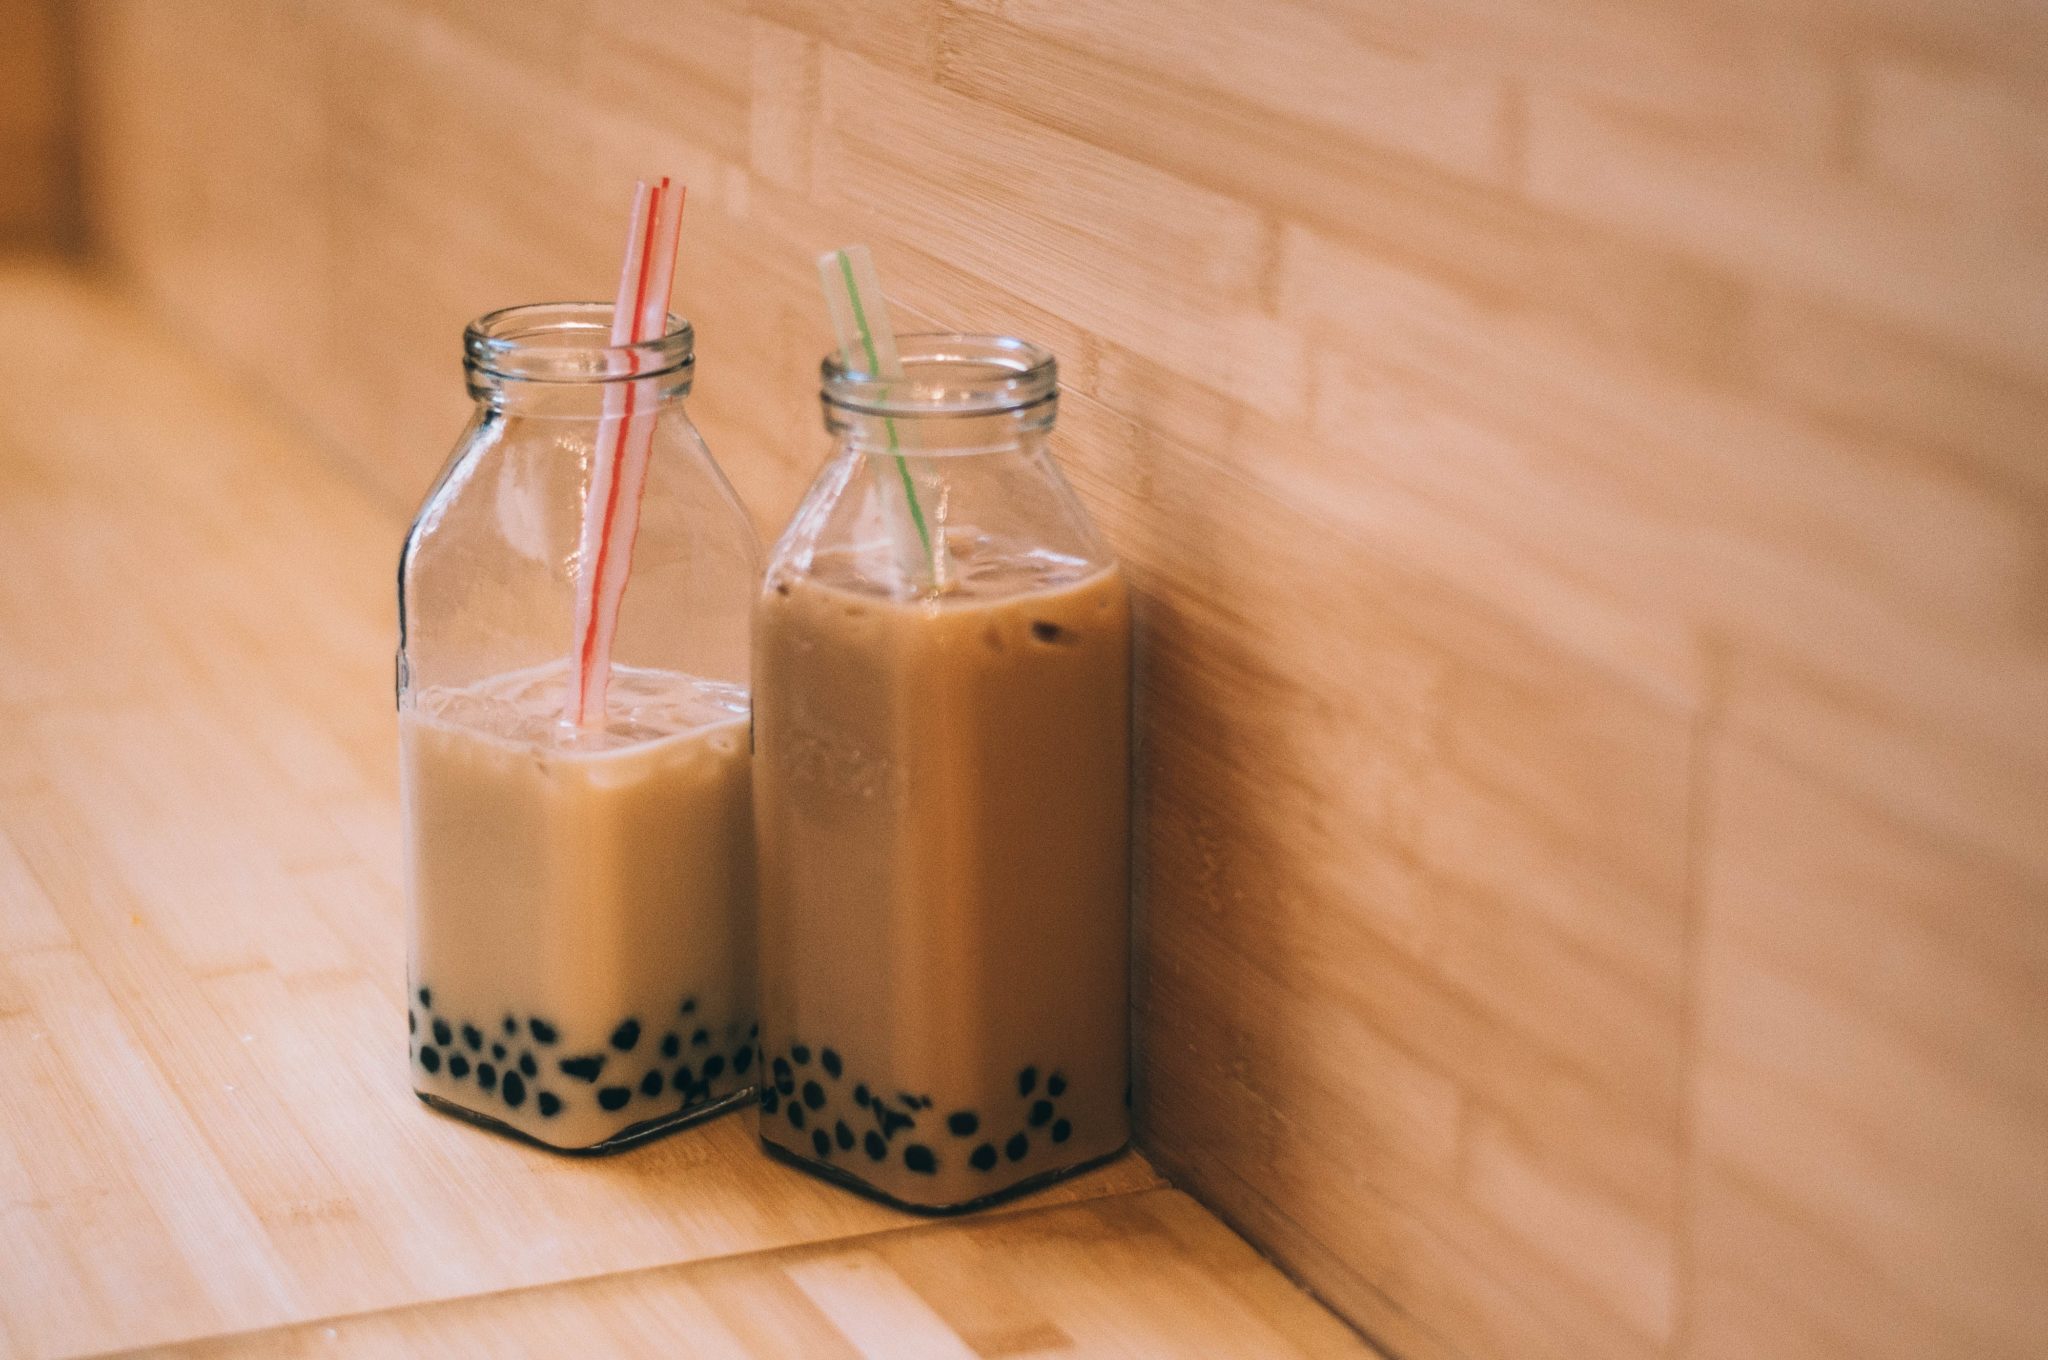 According to GrabFood, bubble tea drinkers are also more likely to order the drink during lunch time on all days of the week